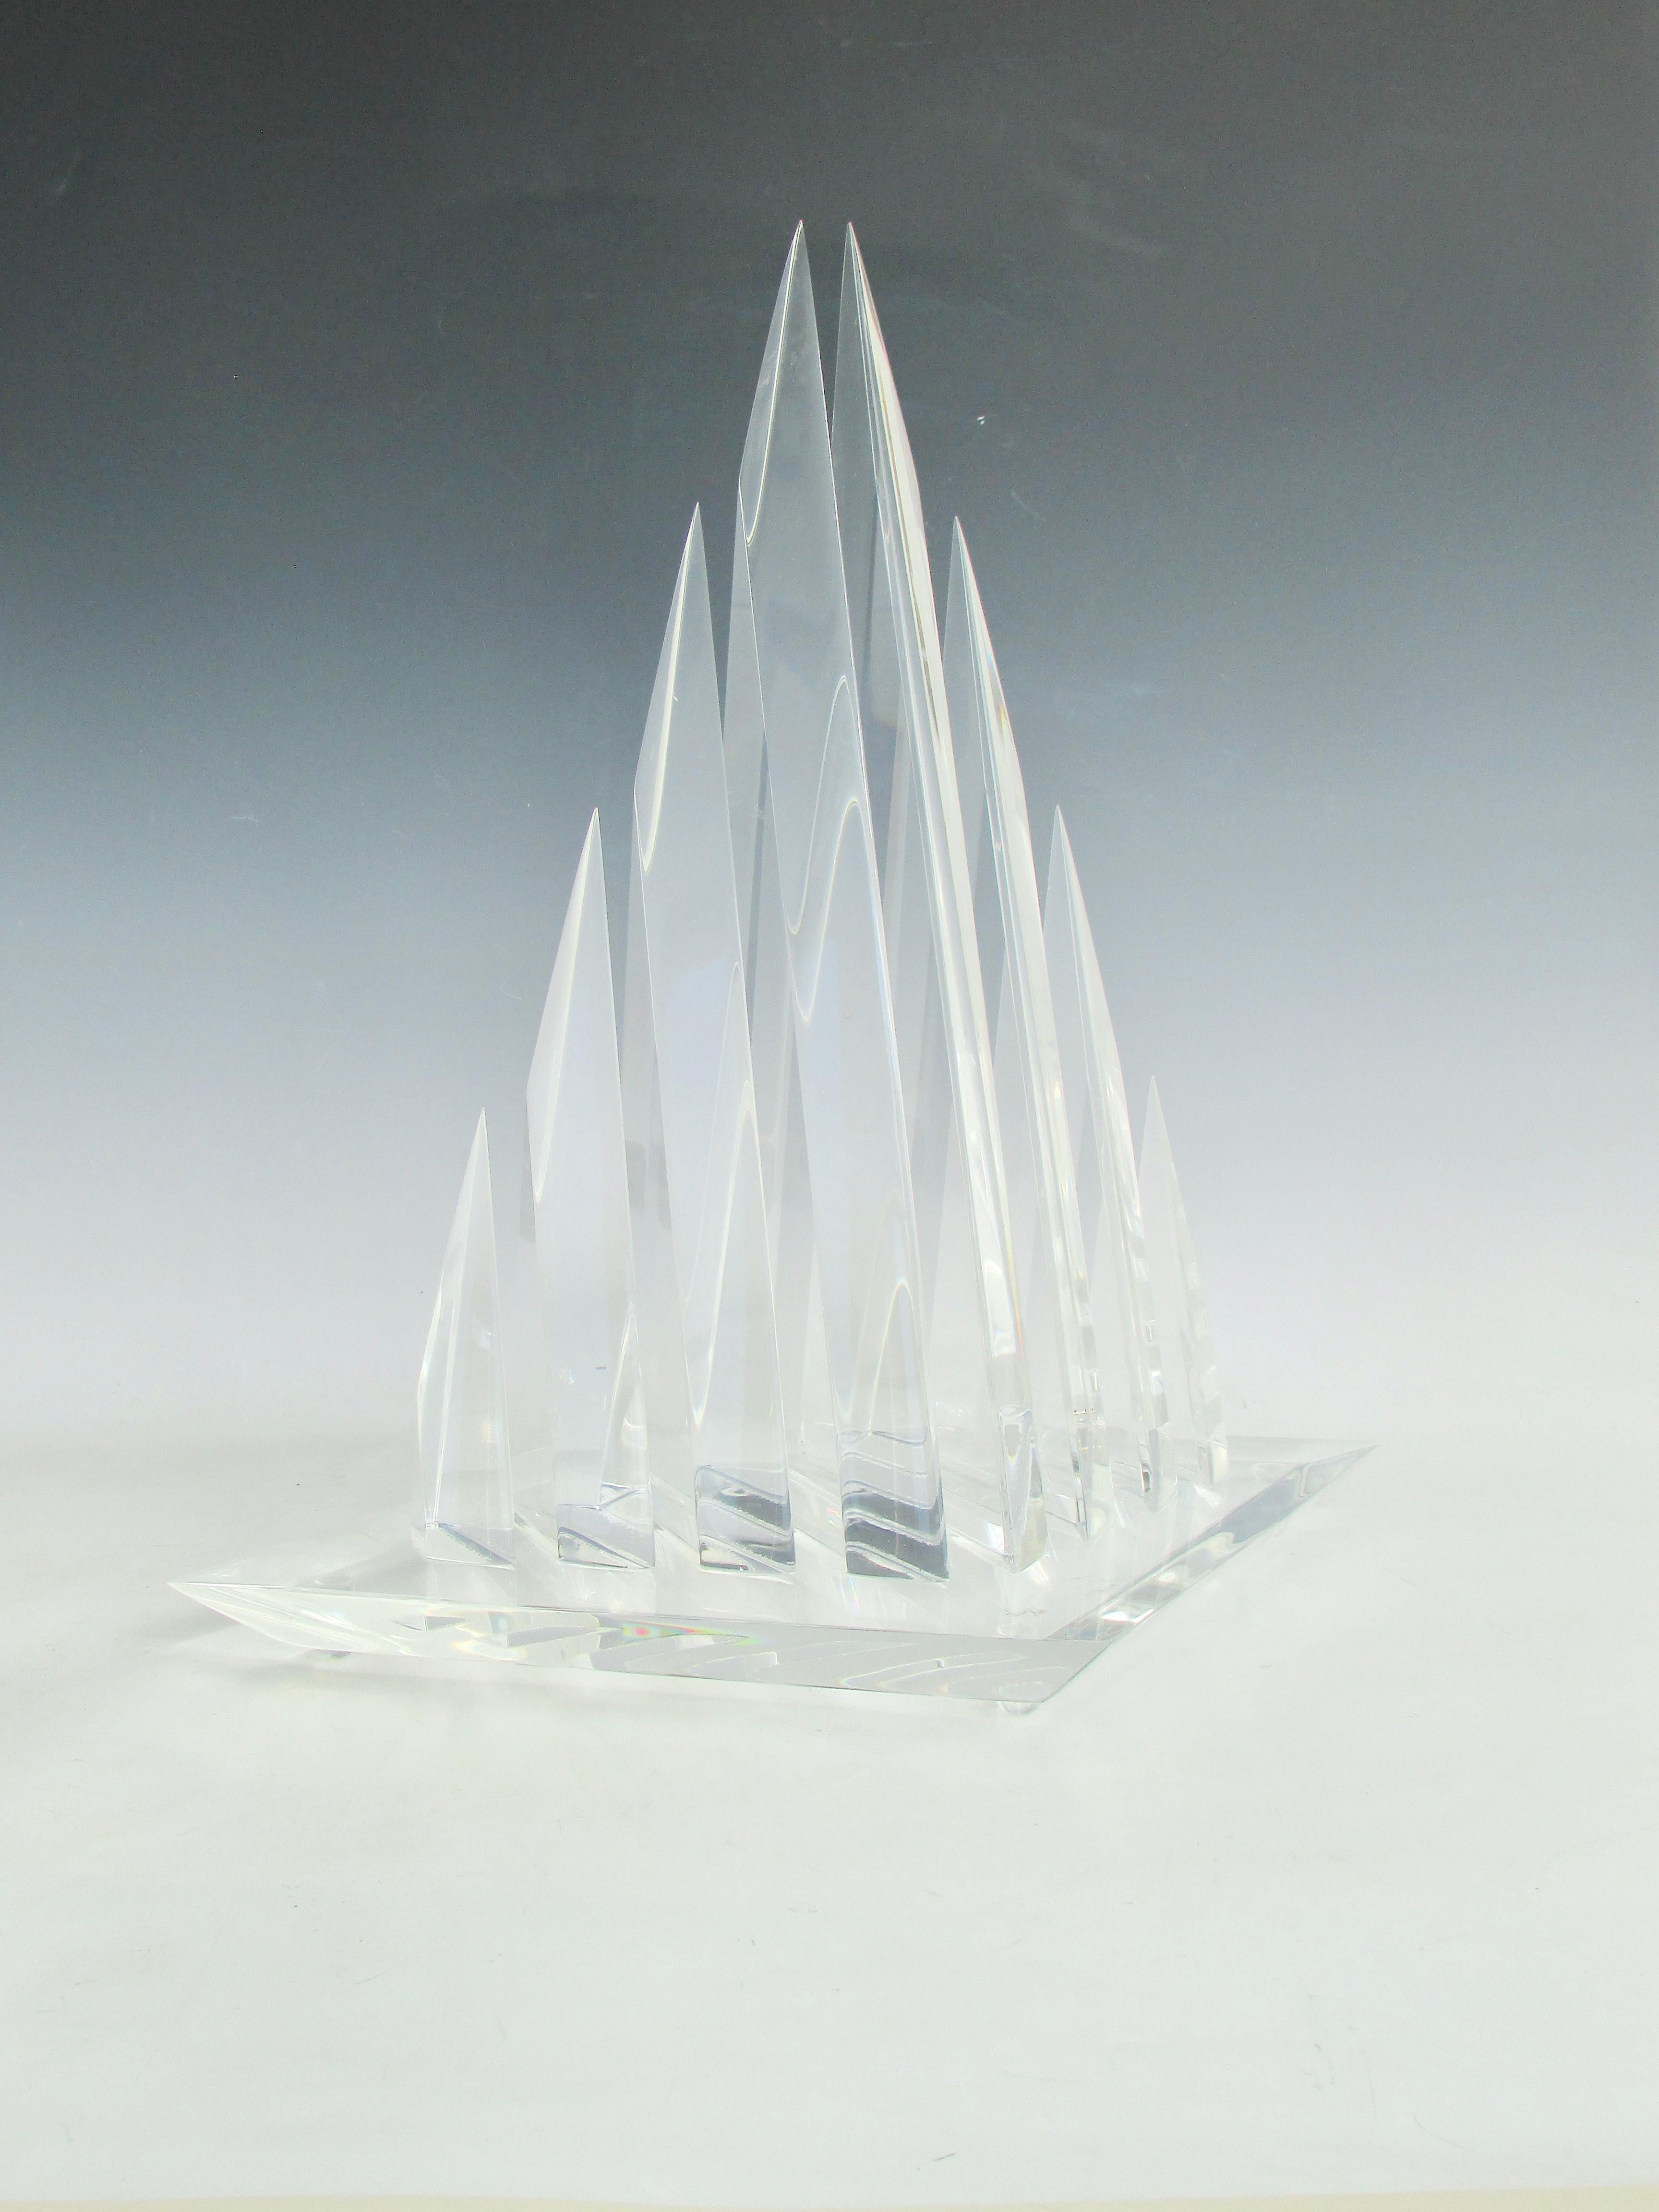 American Hivo Van Teal Segmented Lucite Pyramid, Triangle Sculpture For Sale